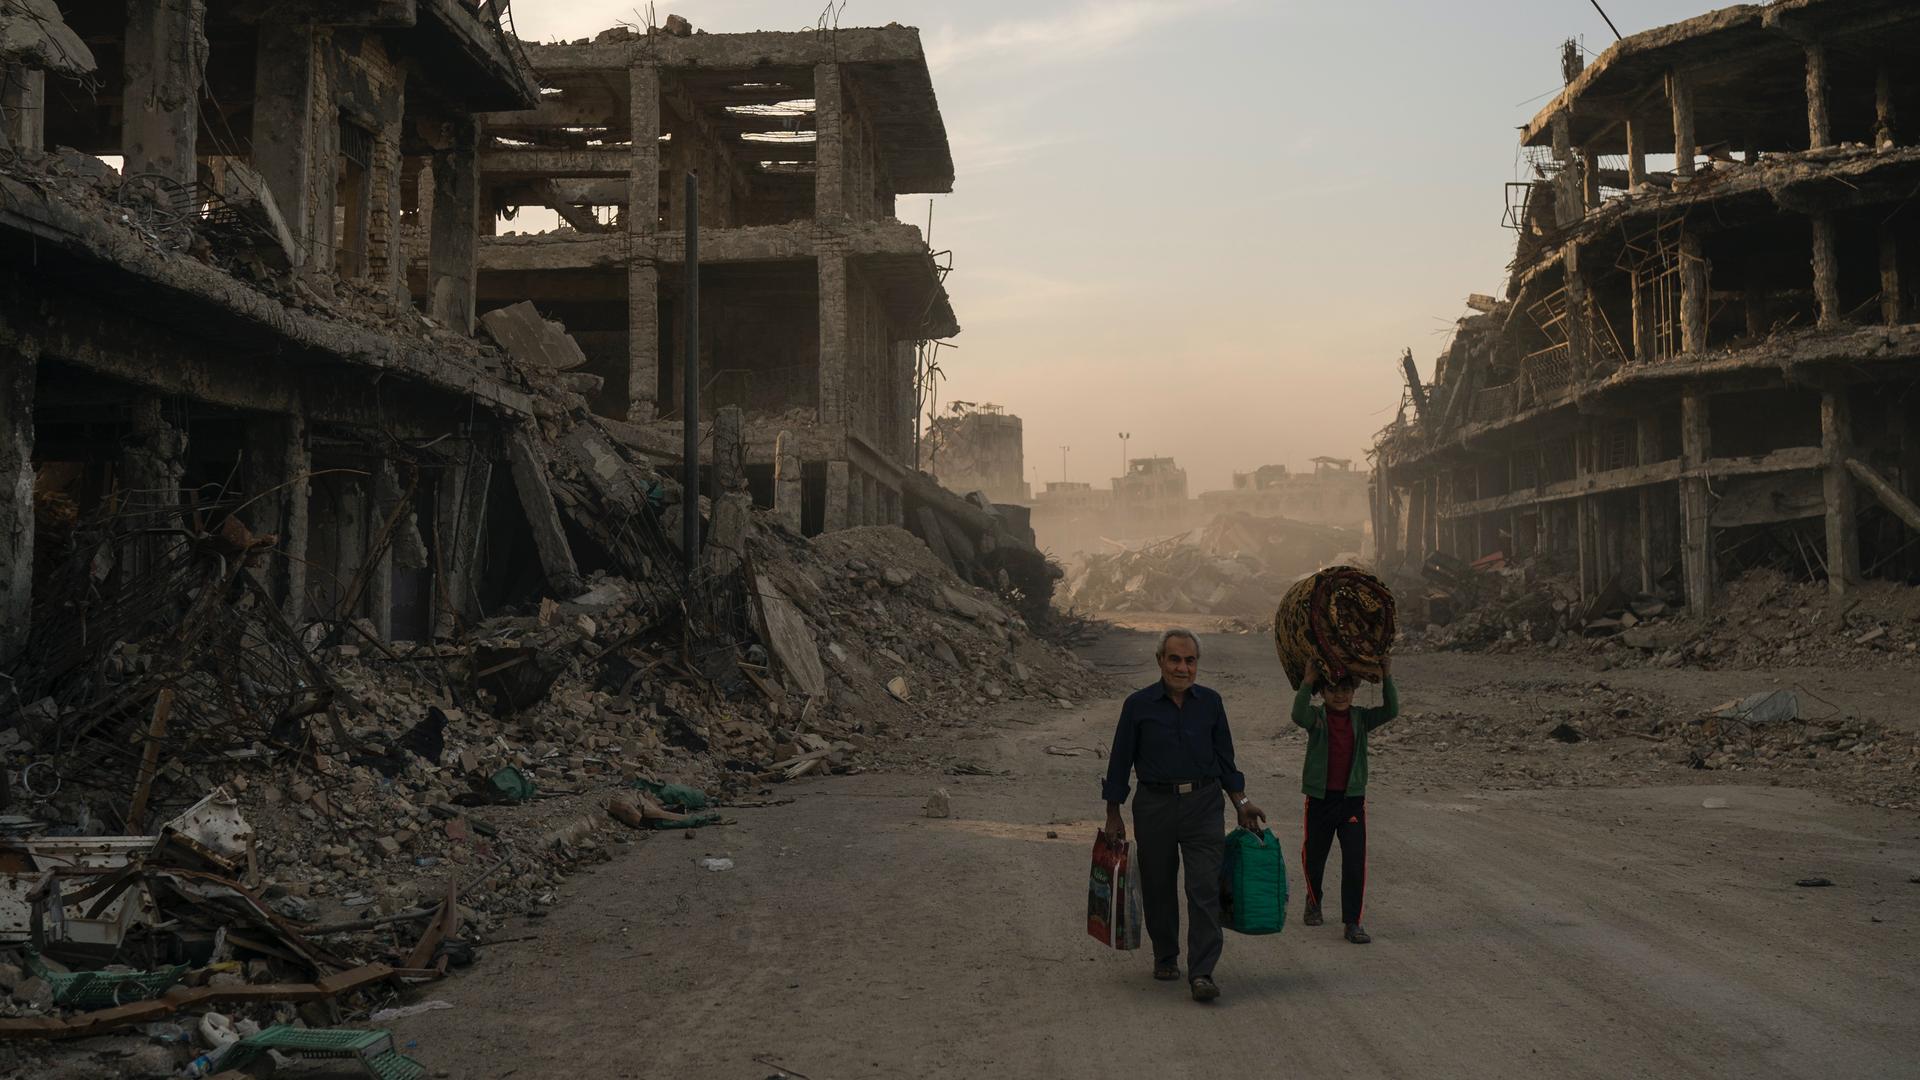 Two people carry luggage down a bombed out street in Mosul. 